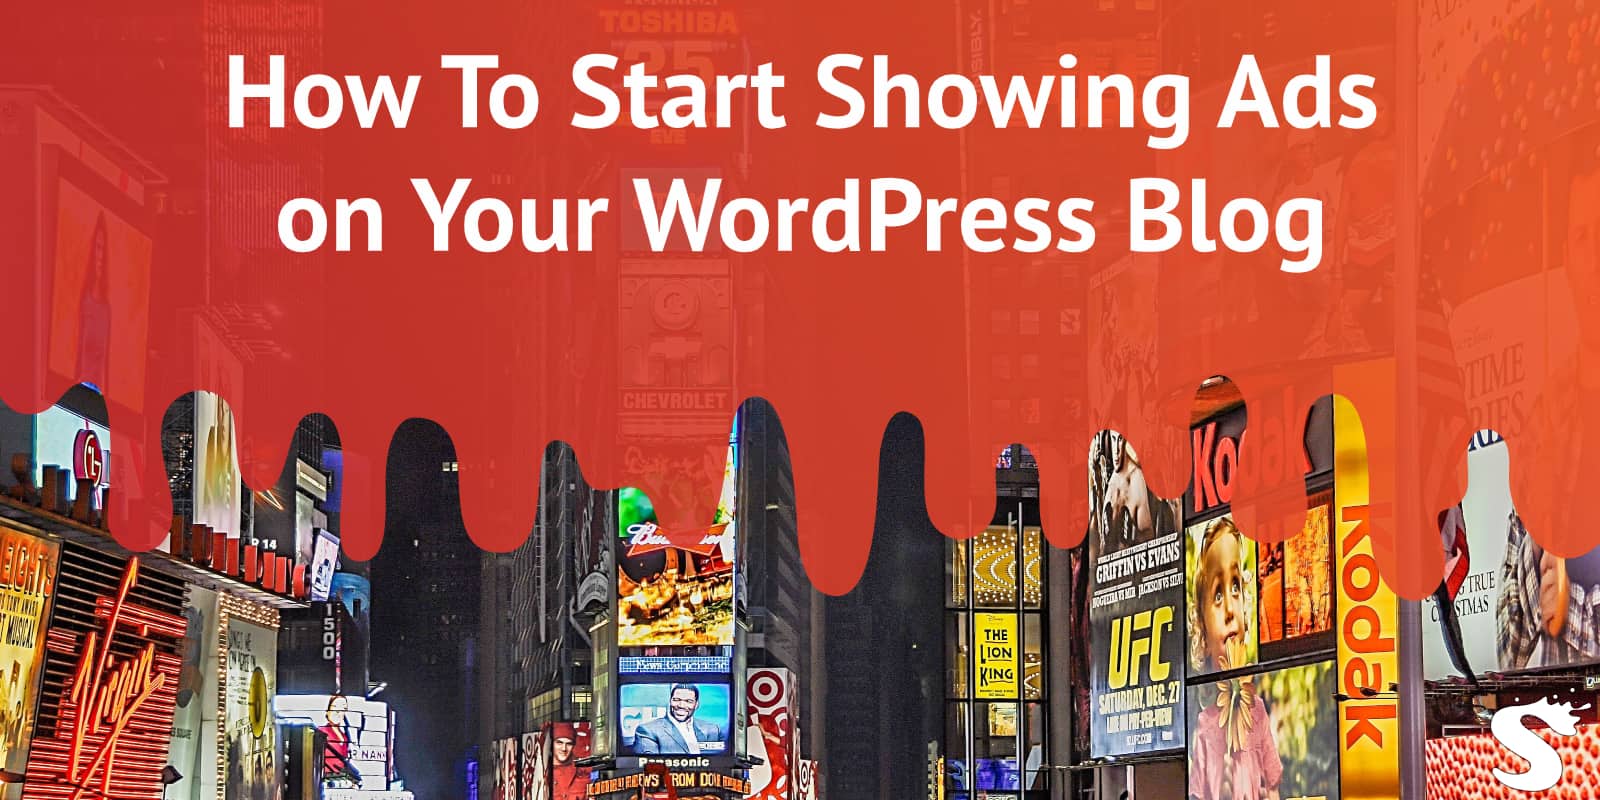 Start Showing Adds on your WordPress Blog